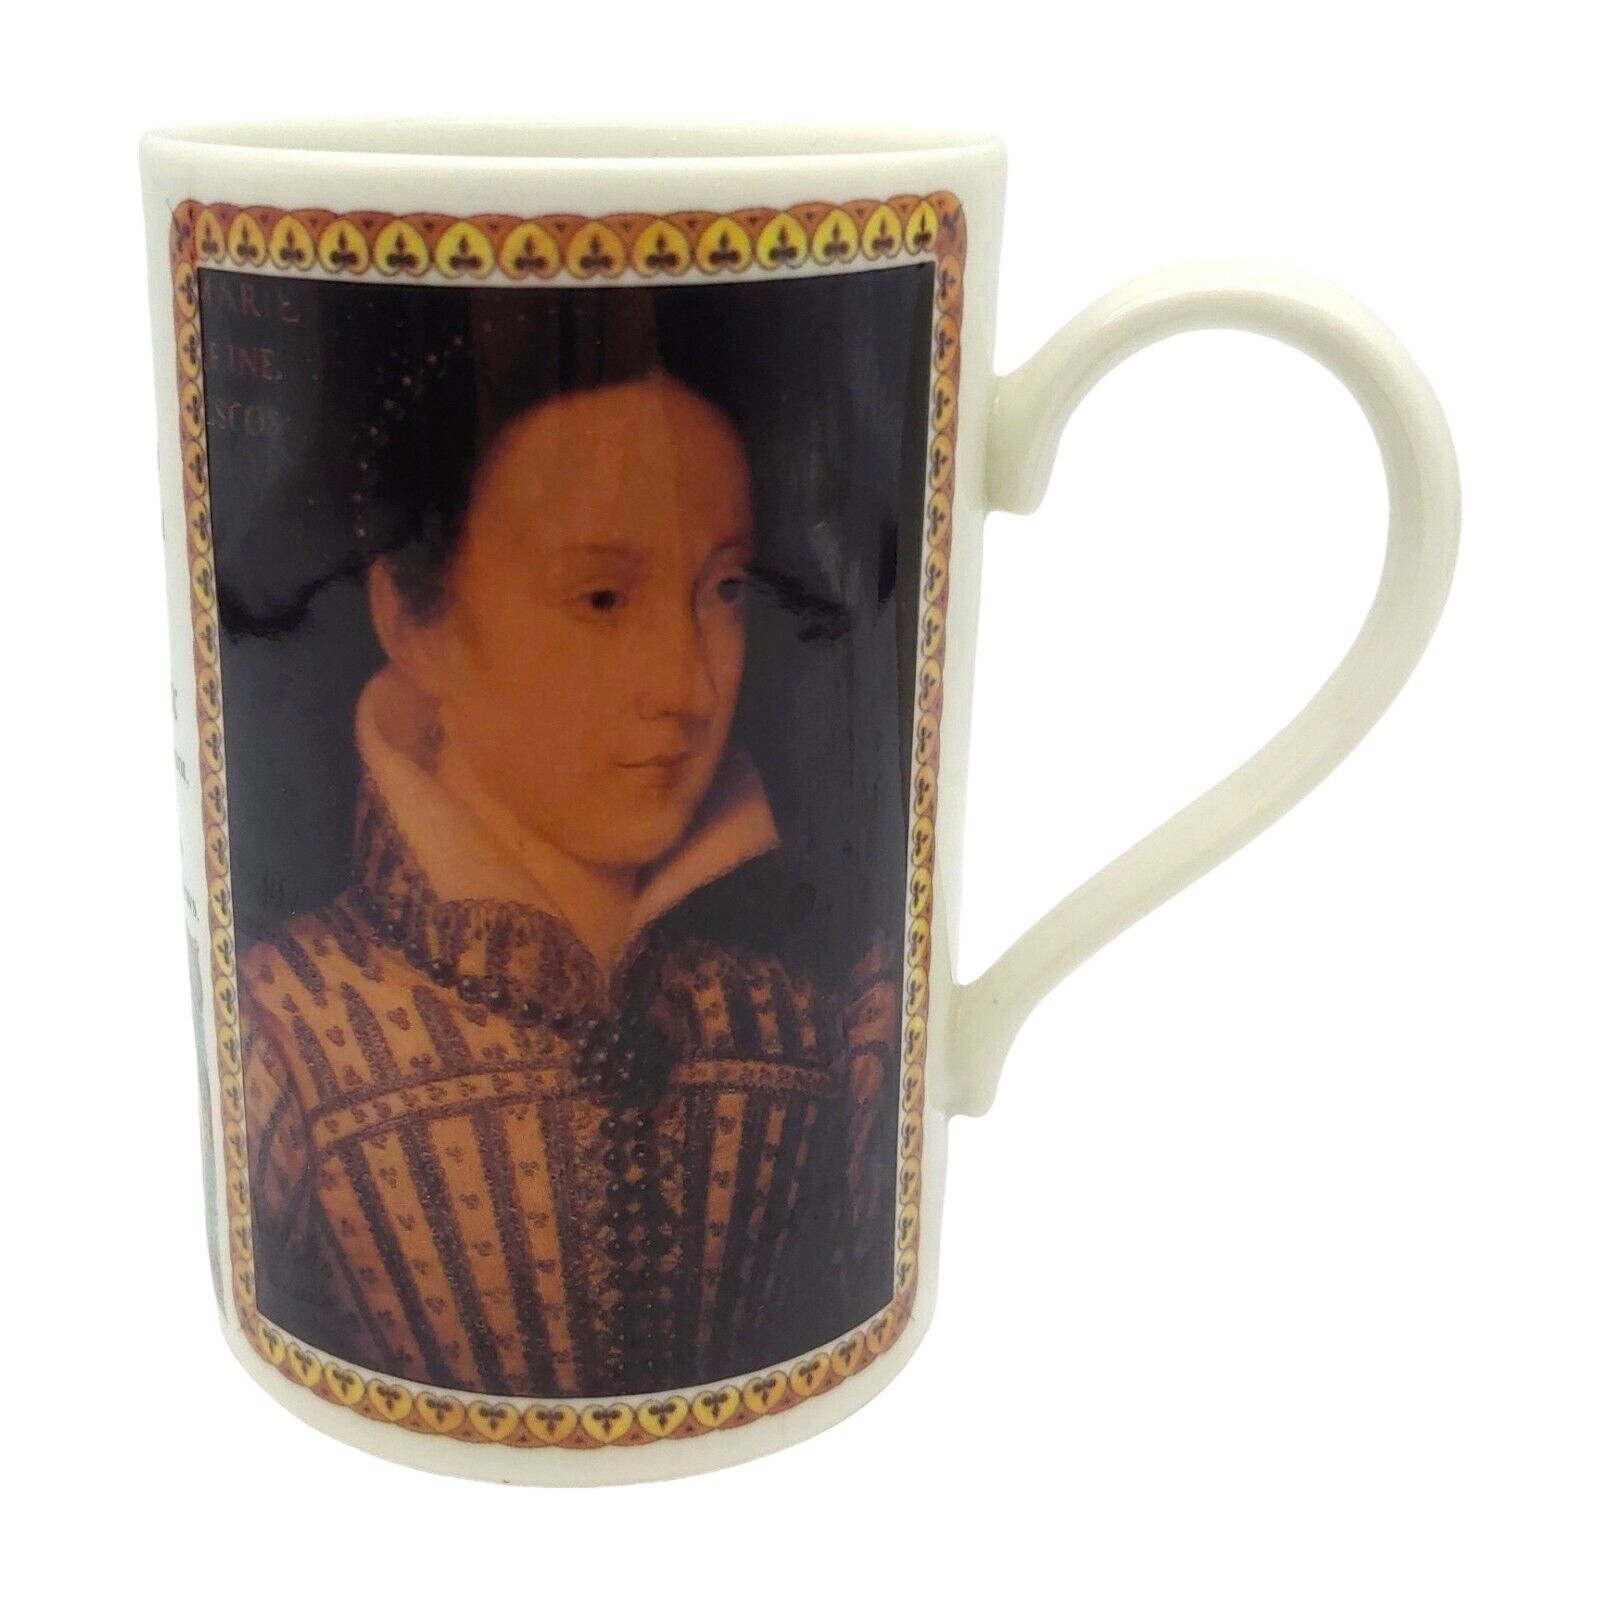 Dunoon Mary Queen of Scots Coffee Mug - 10oz Scottish Royalty Historical Facts